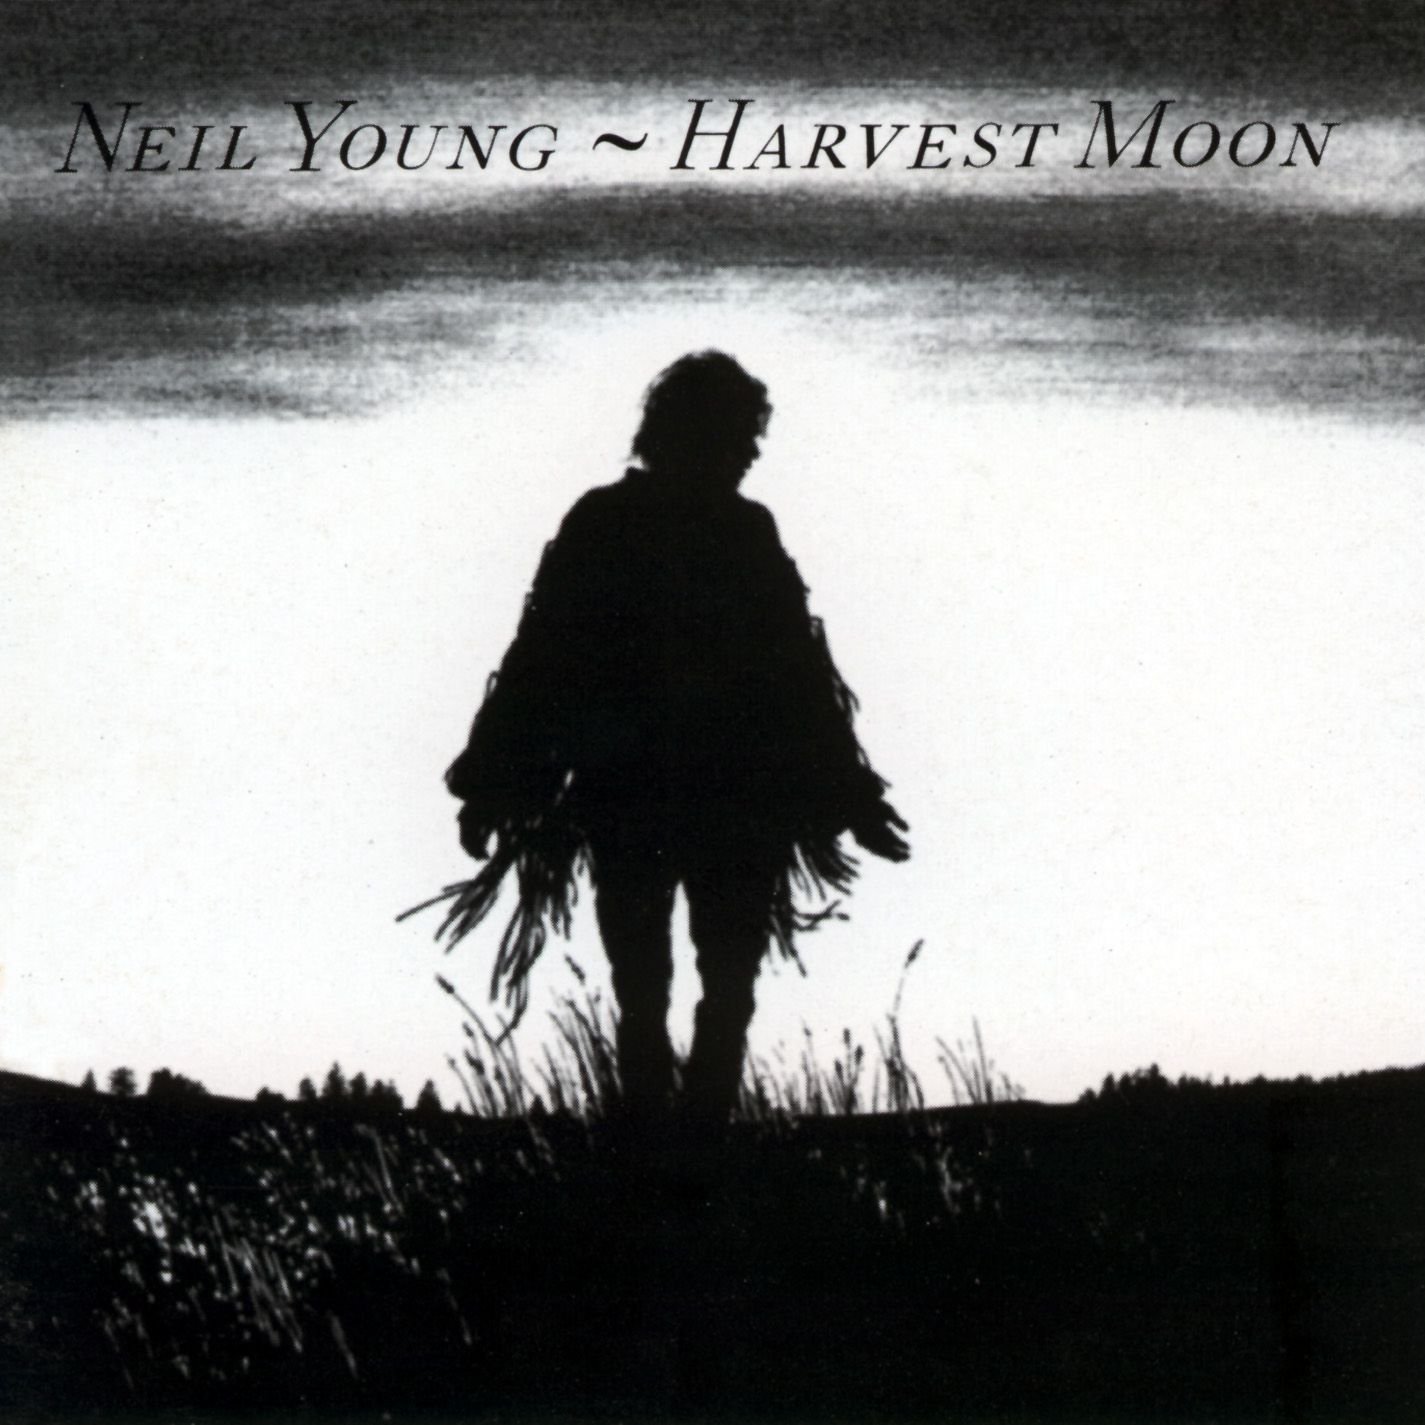 Neil Young - RSD - Harvest Moon (2017 Remastered) (LP) Neil Young